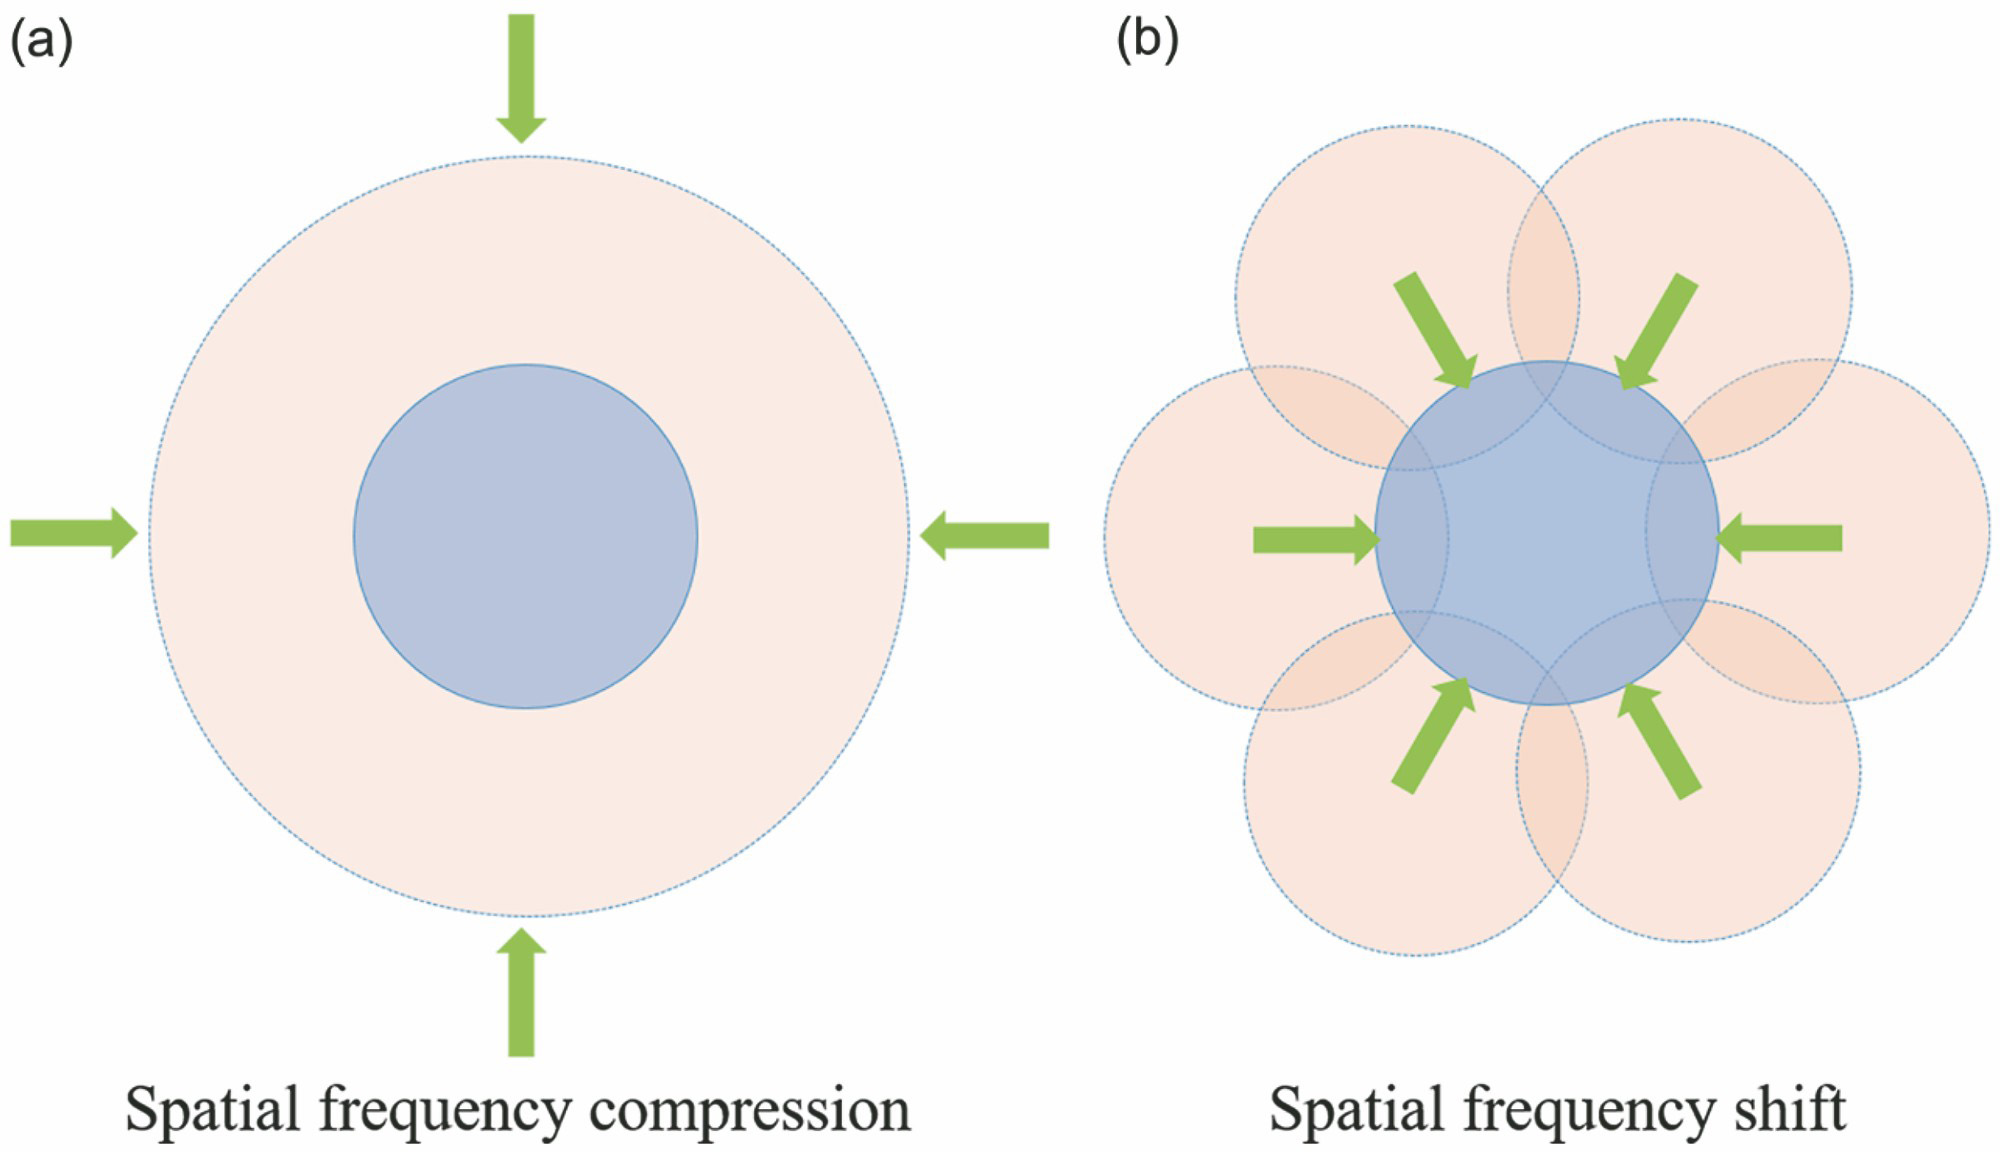 Two basic mechanisms for improving resolution[10]. (a) Frequency compression; (b) frequency shift[11]